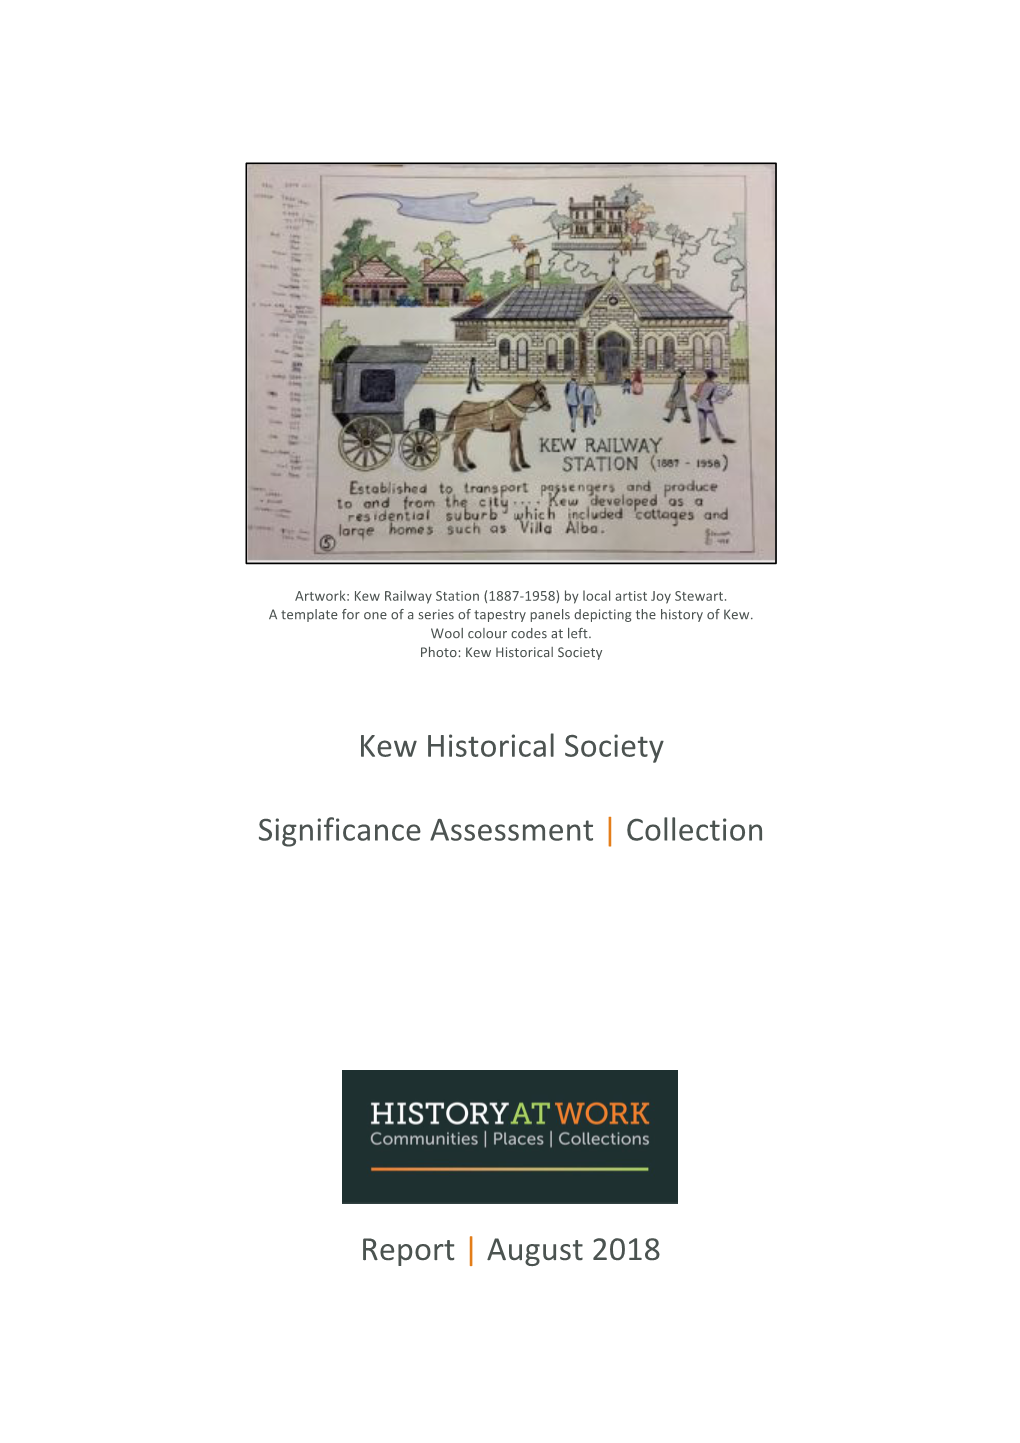 Kew Historical Society Significance Assessment | Collection Report